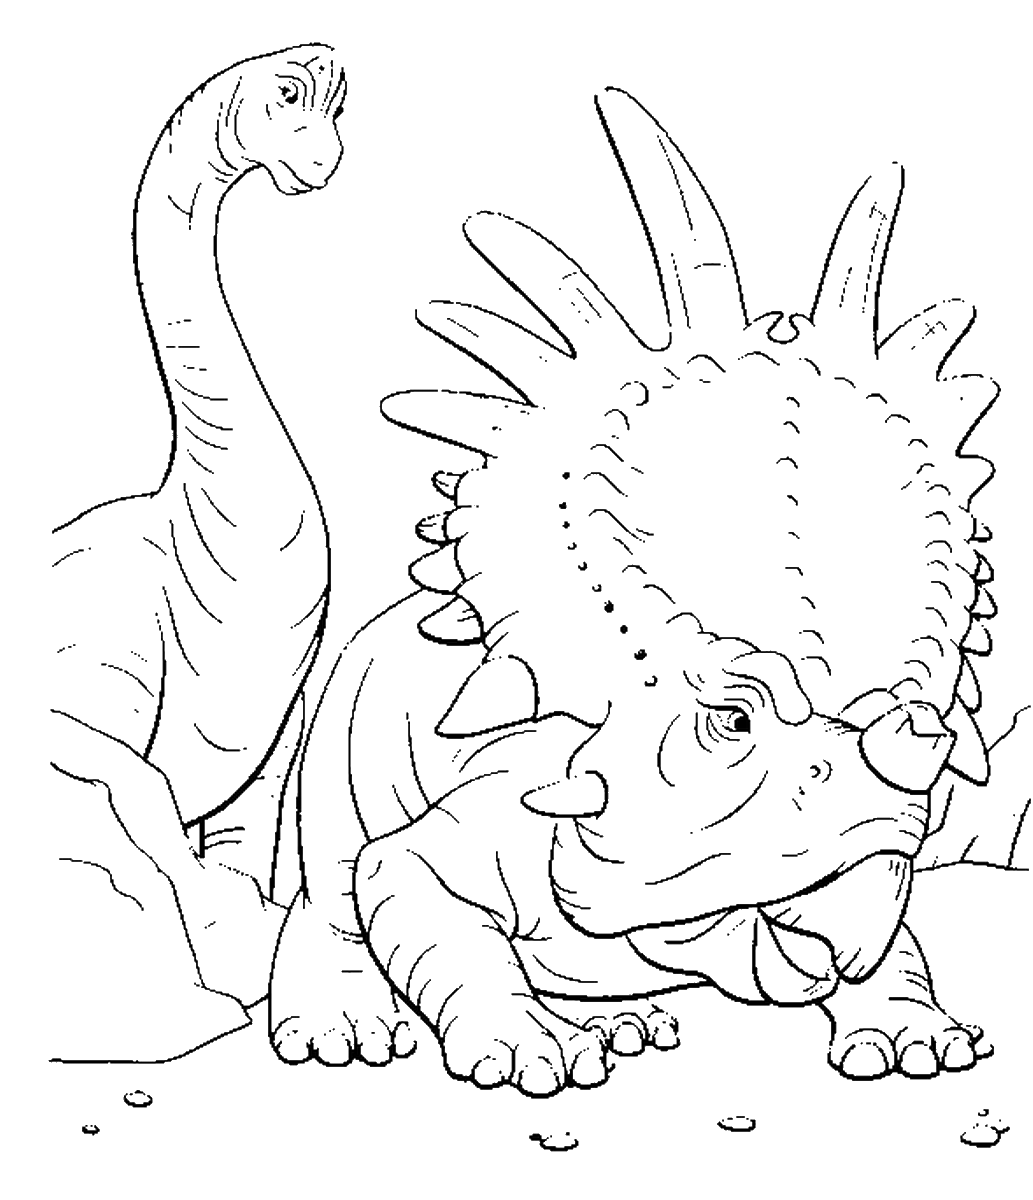 Jurassic World Indoraptor Coloring Pages   Jurassic World Coloring ...